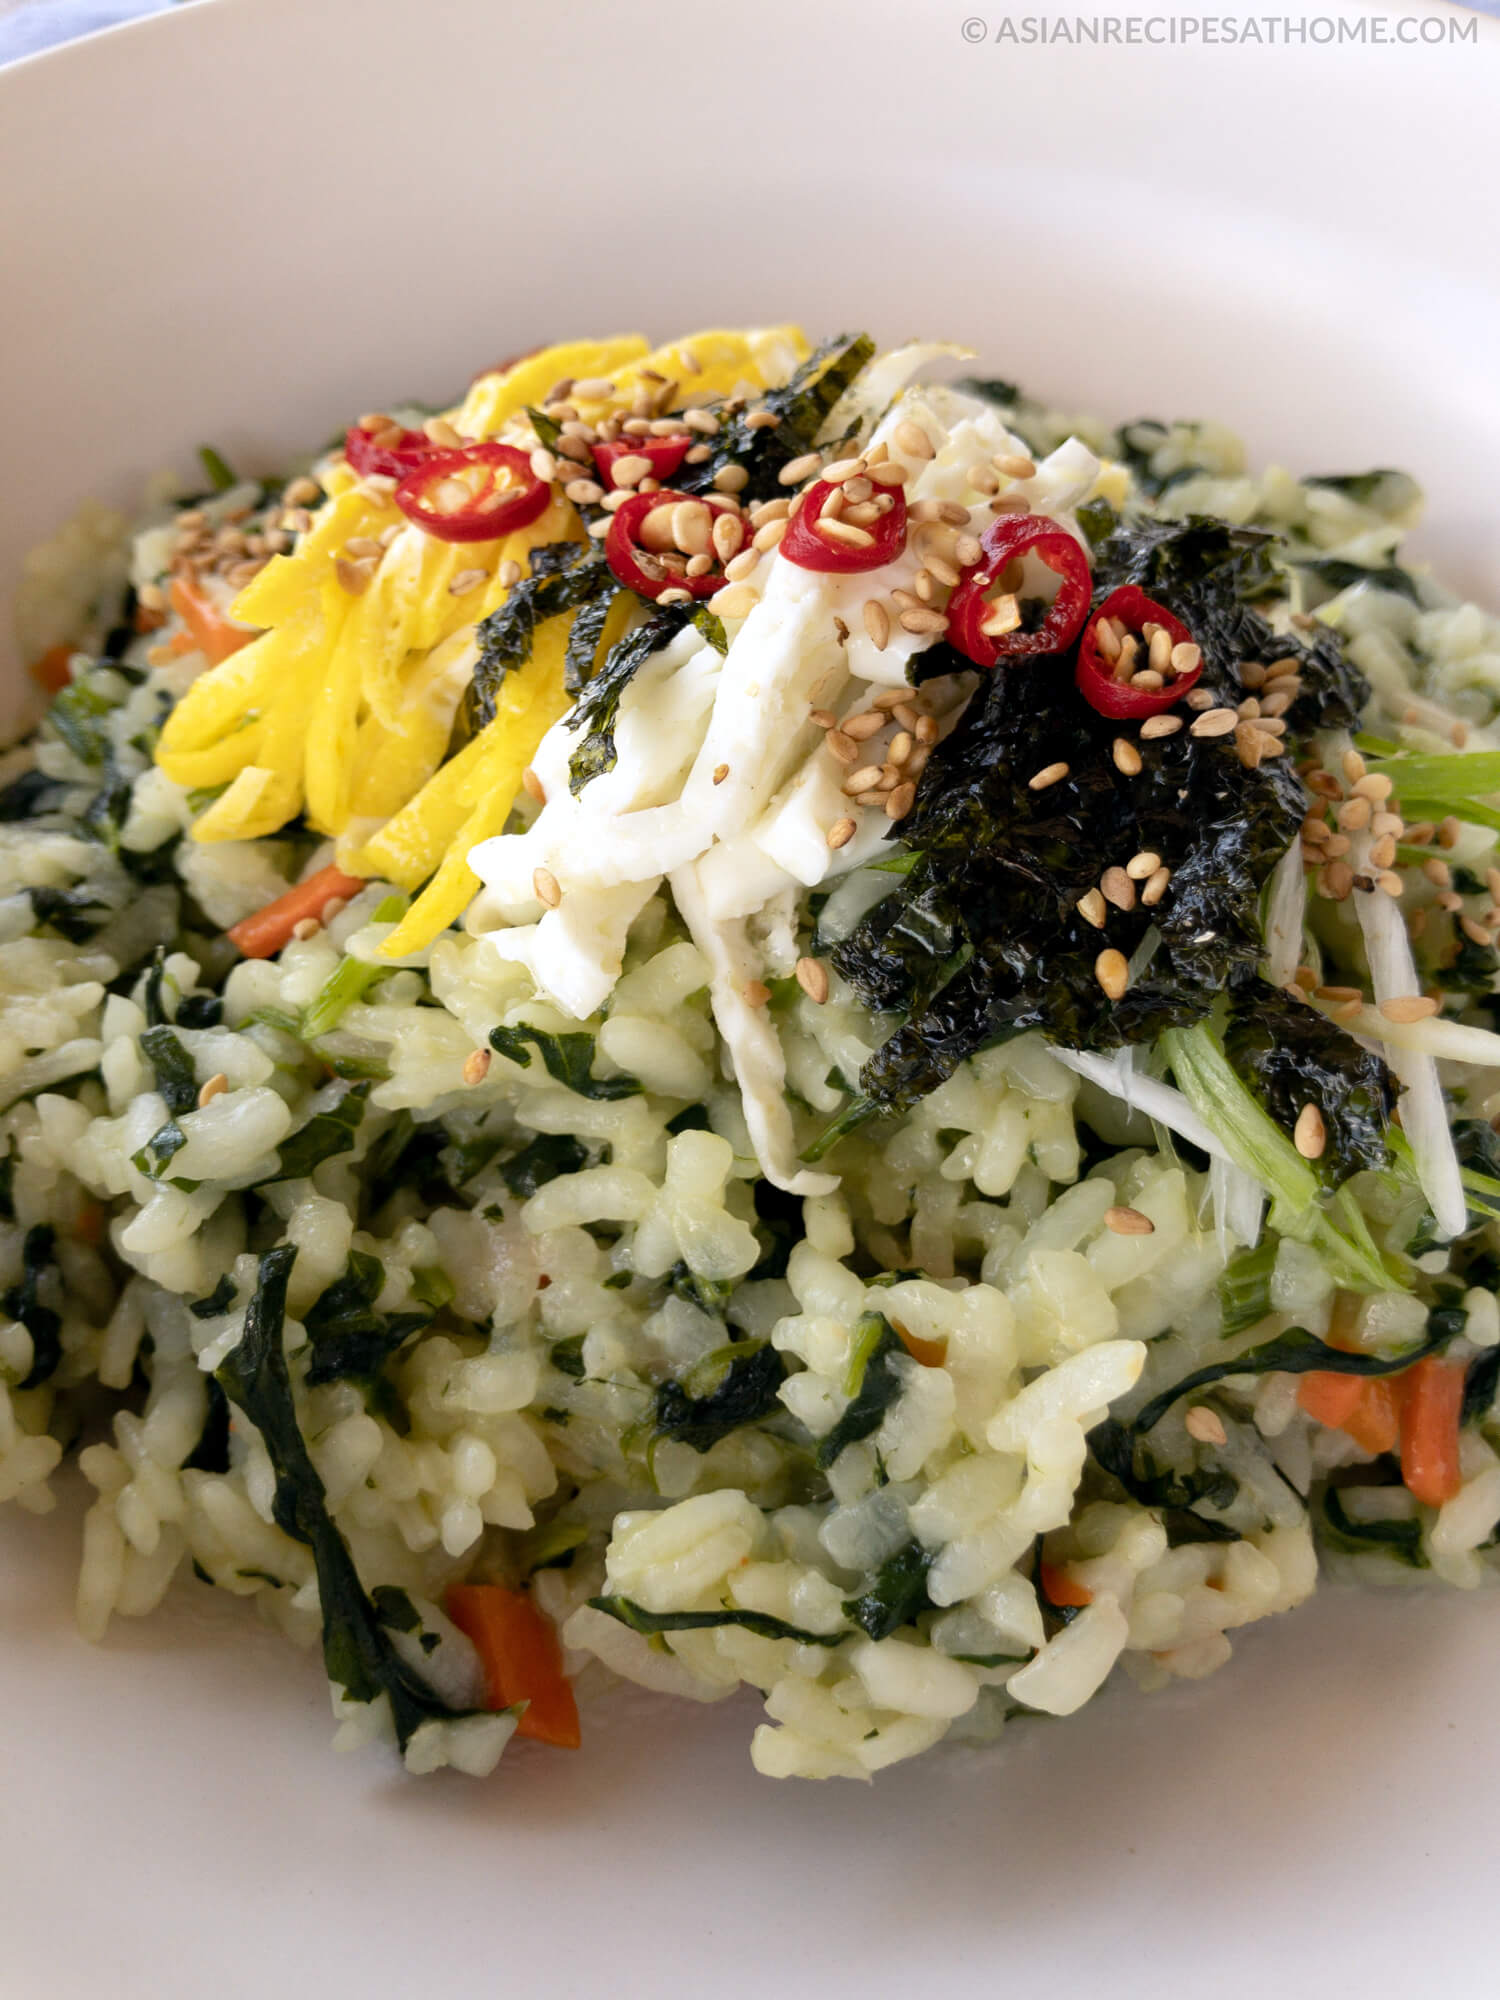 Korean spinach rice is served with pan-fried egg strips, strips of roasted seaweed, and topped with a drizzle of our savory Sesame Green Onion sauce.